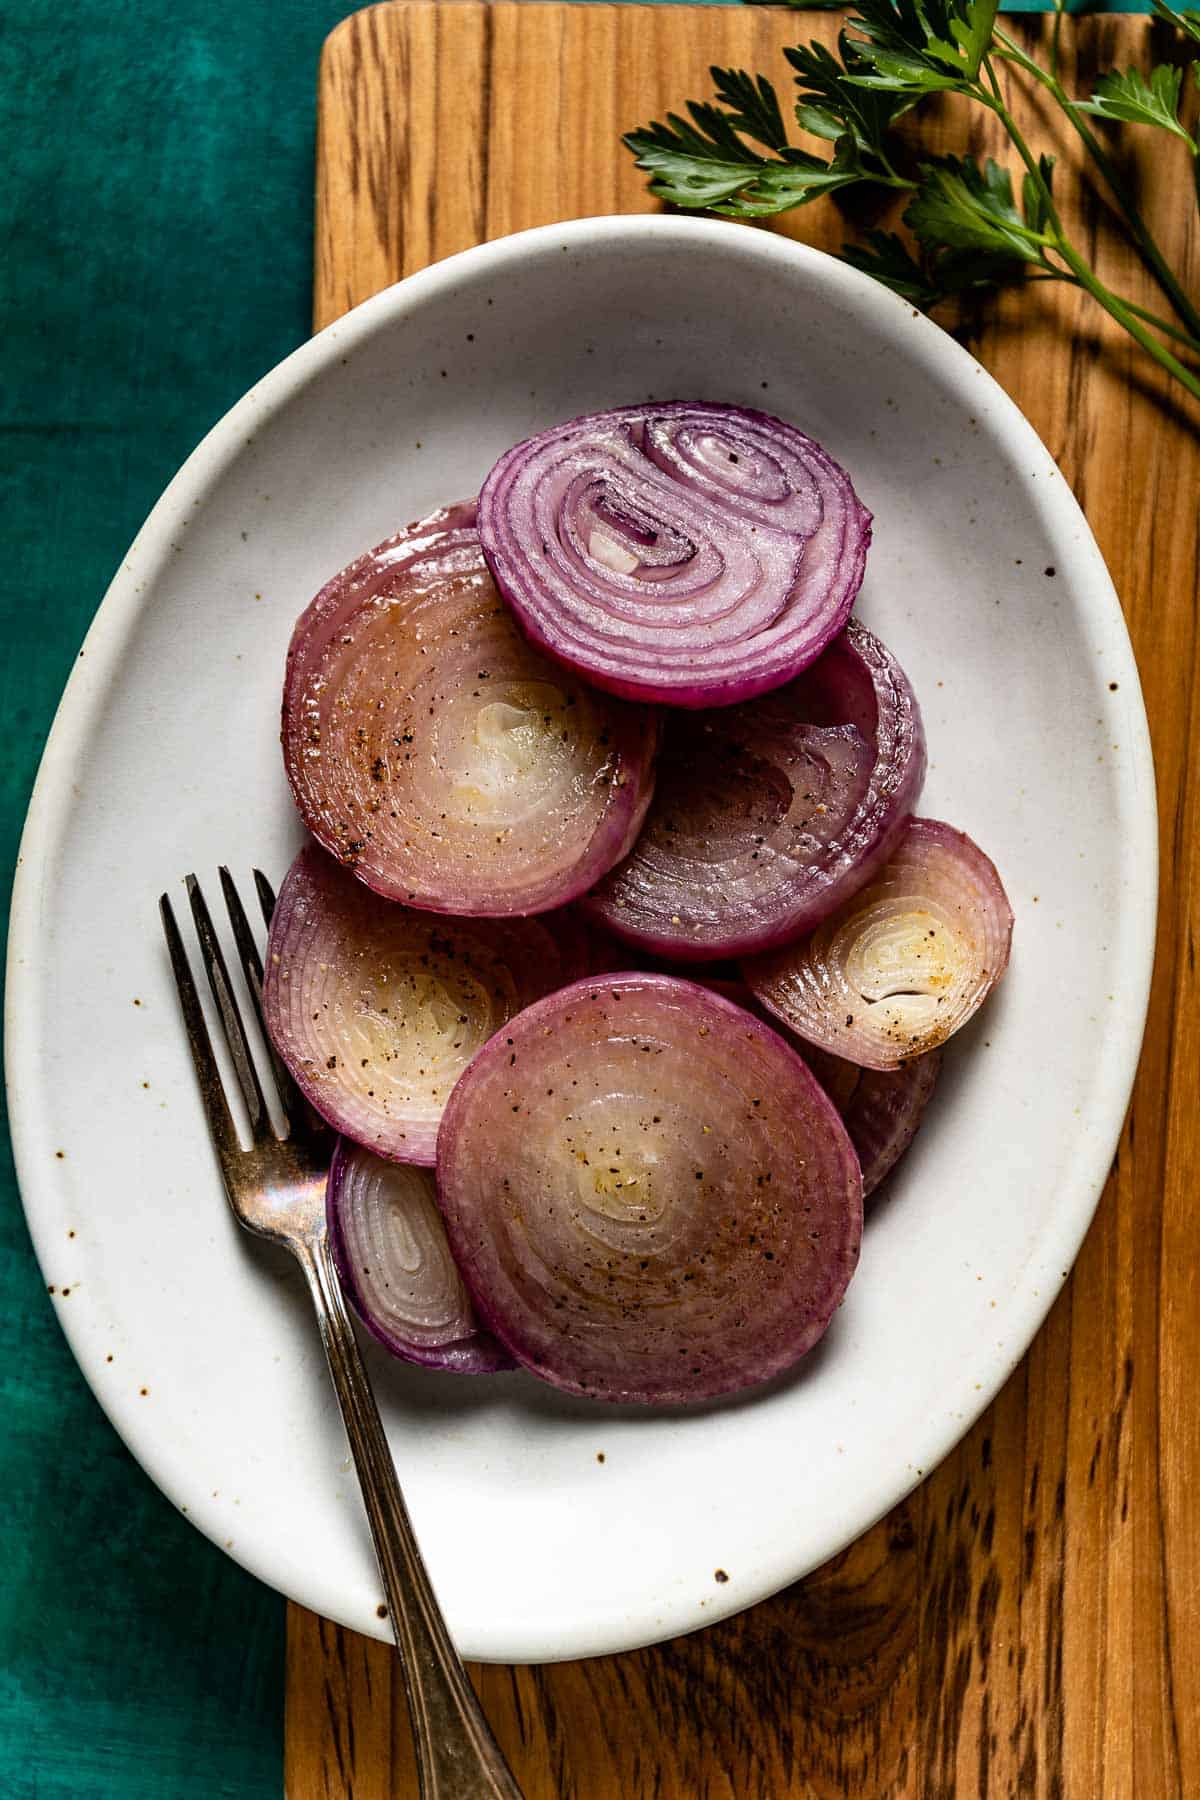 Oven roasted red onions on a plate with a fork on the side.